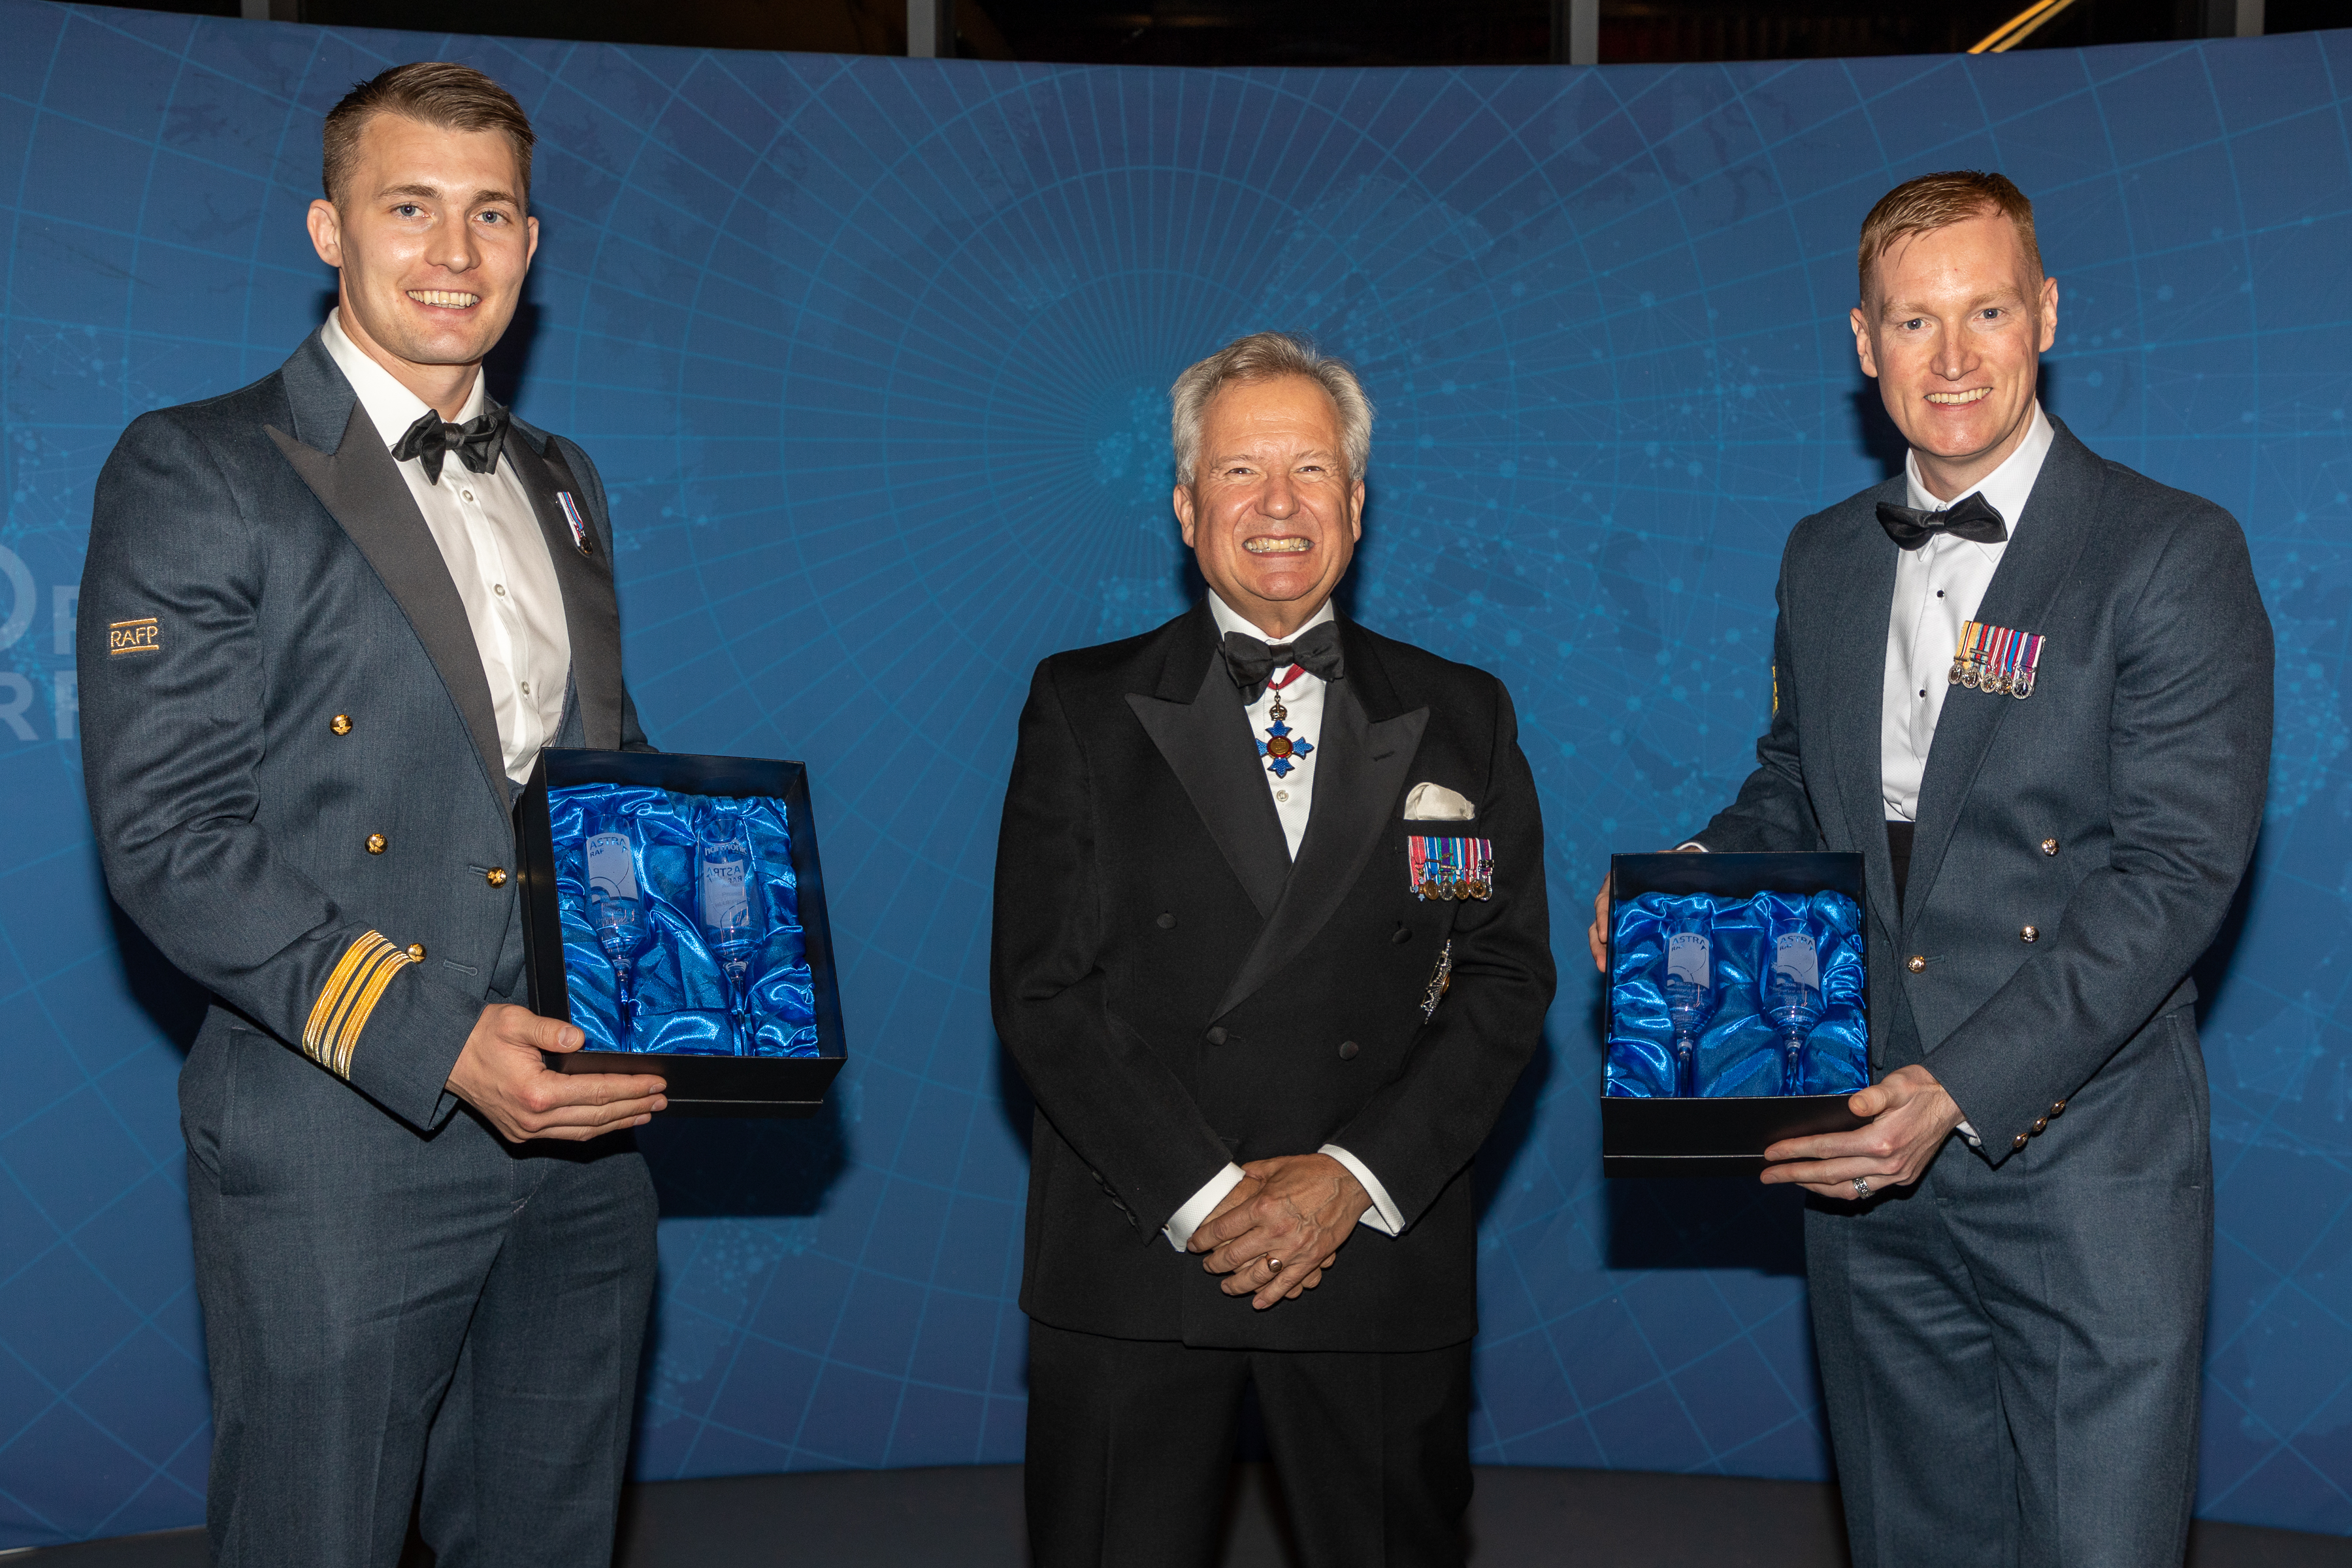 Squadron Leader John Barrowcliff and Flight Sergeant Si Ball being presented with the Astra Innovation Award